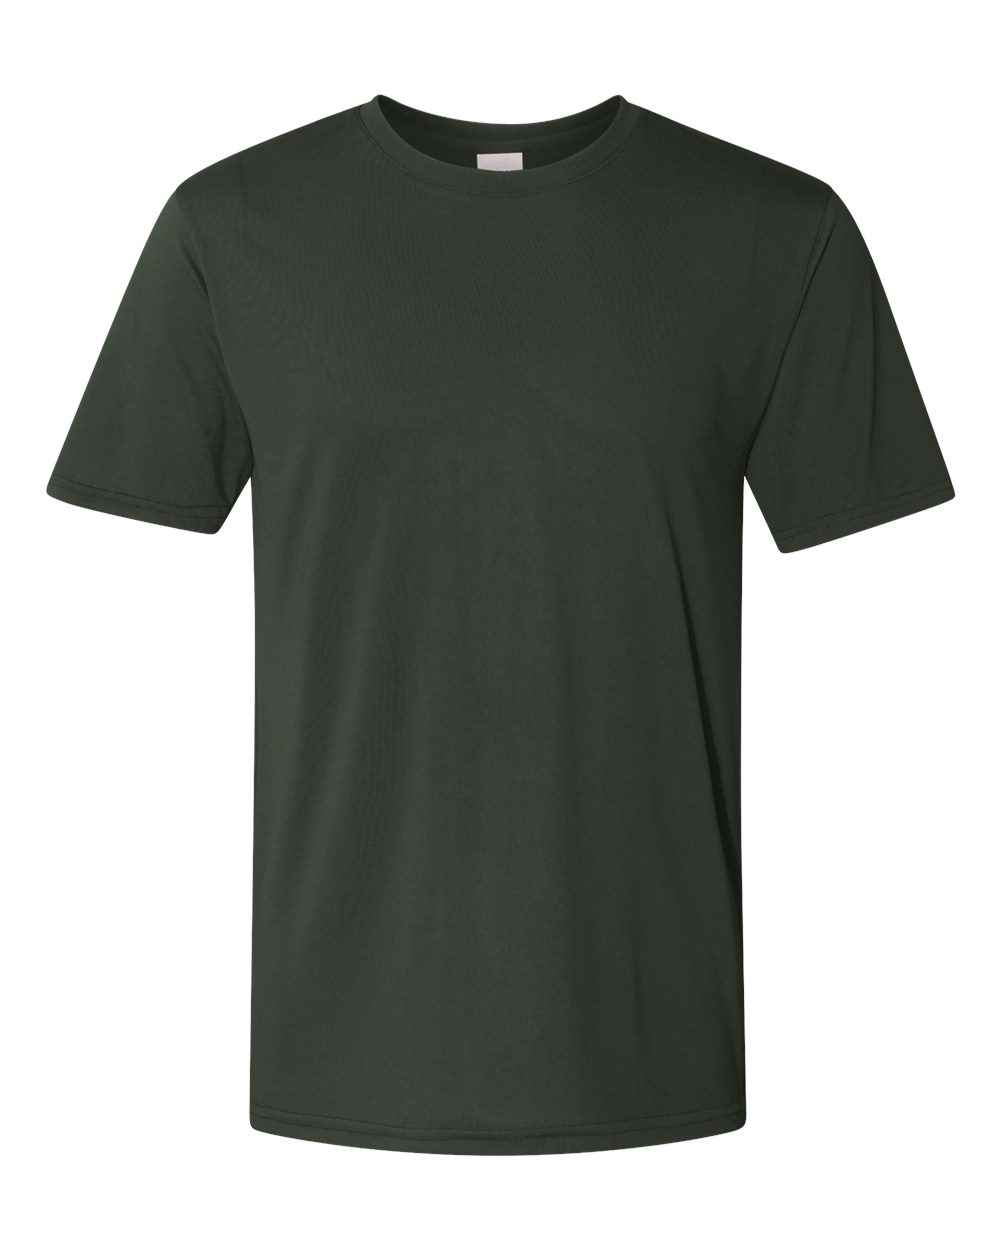 click to view Sport Dark Green